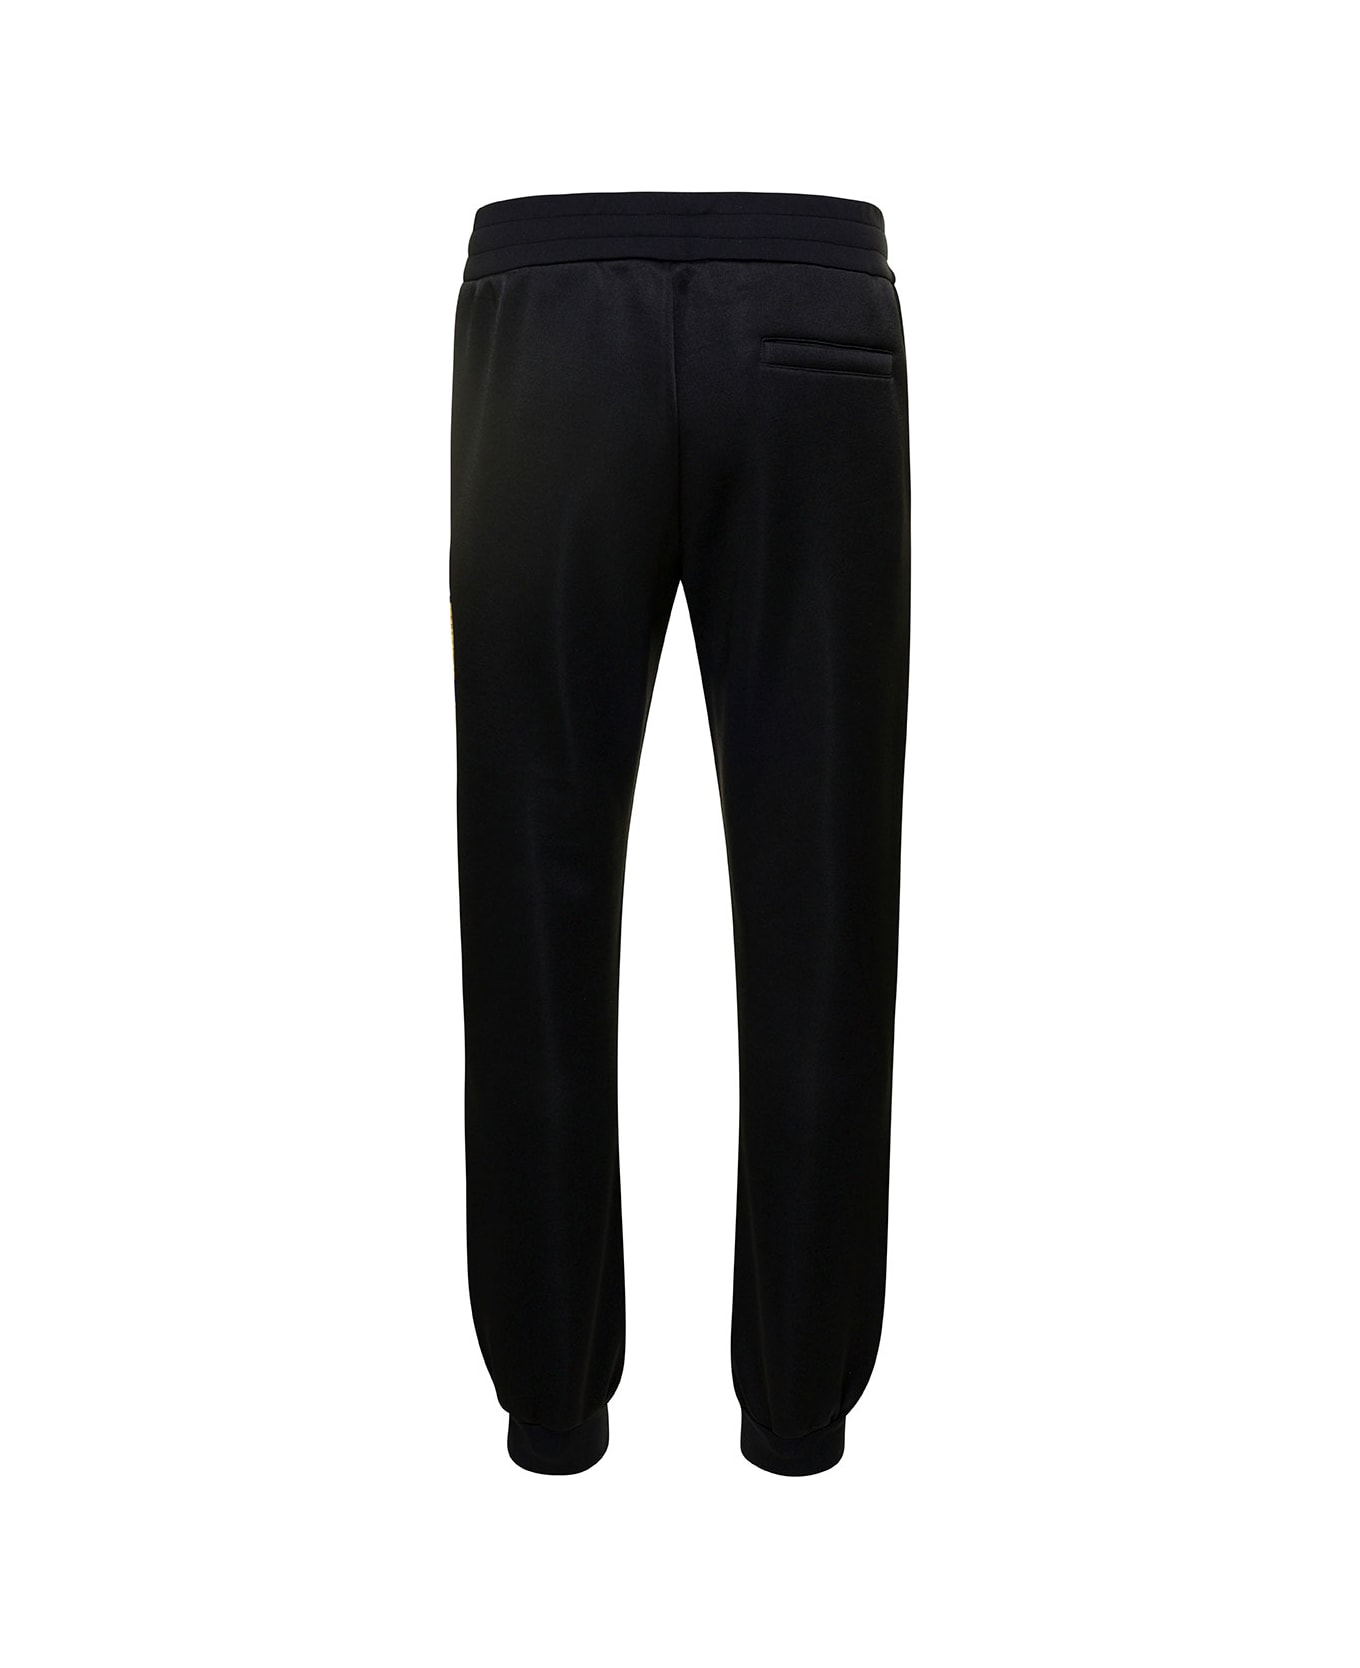 Versace Black Joggers With Barocco Print In Cotton Blend Man - Black